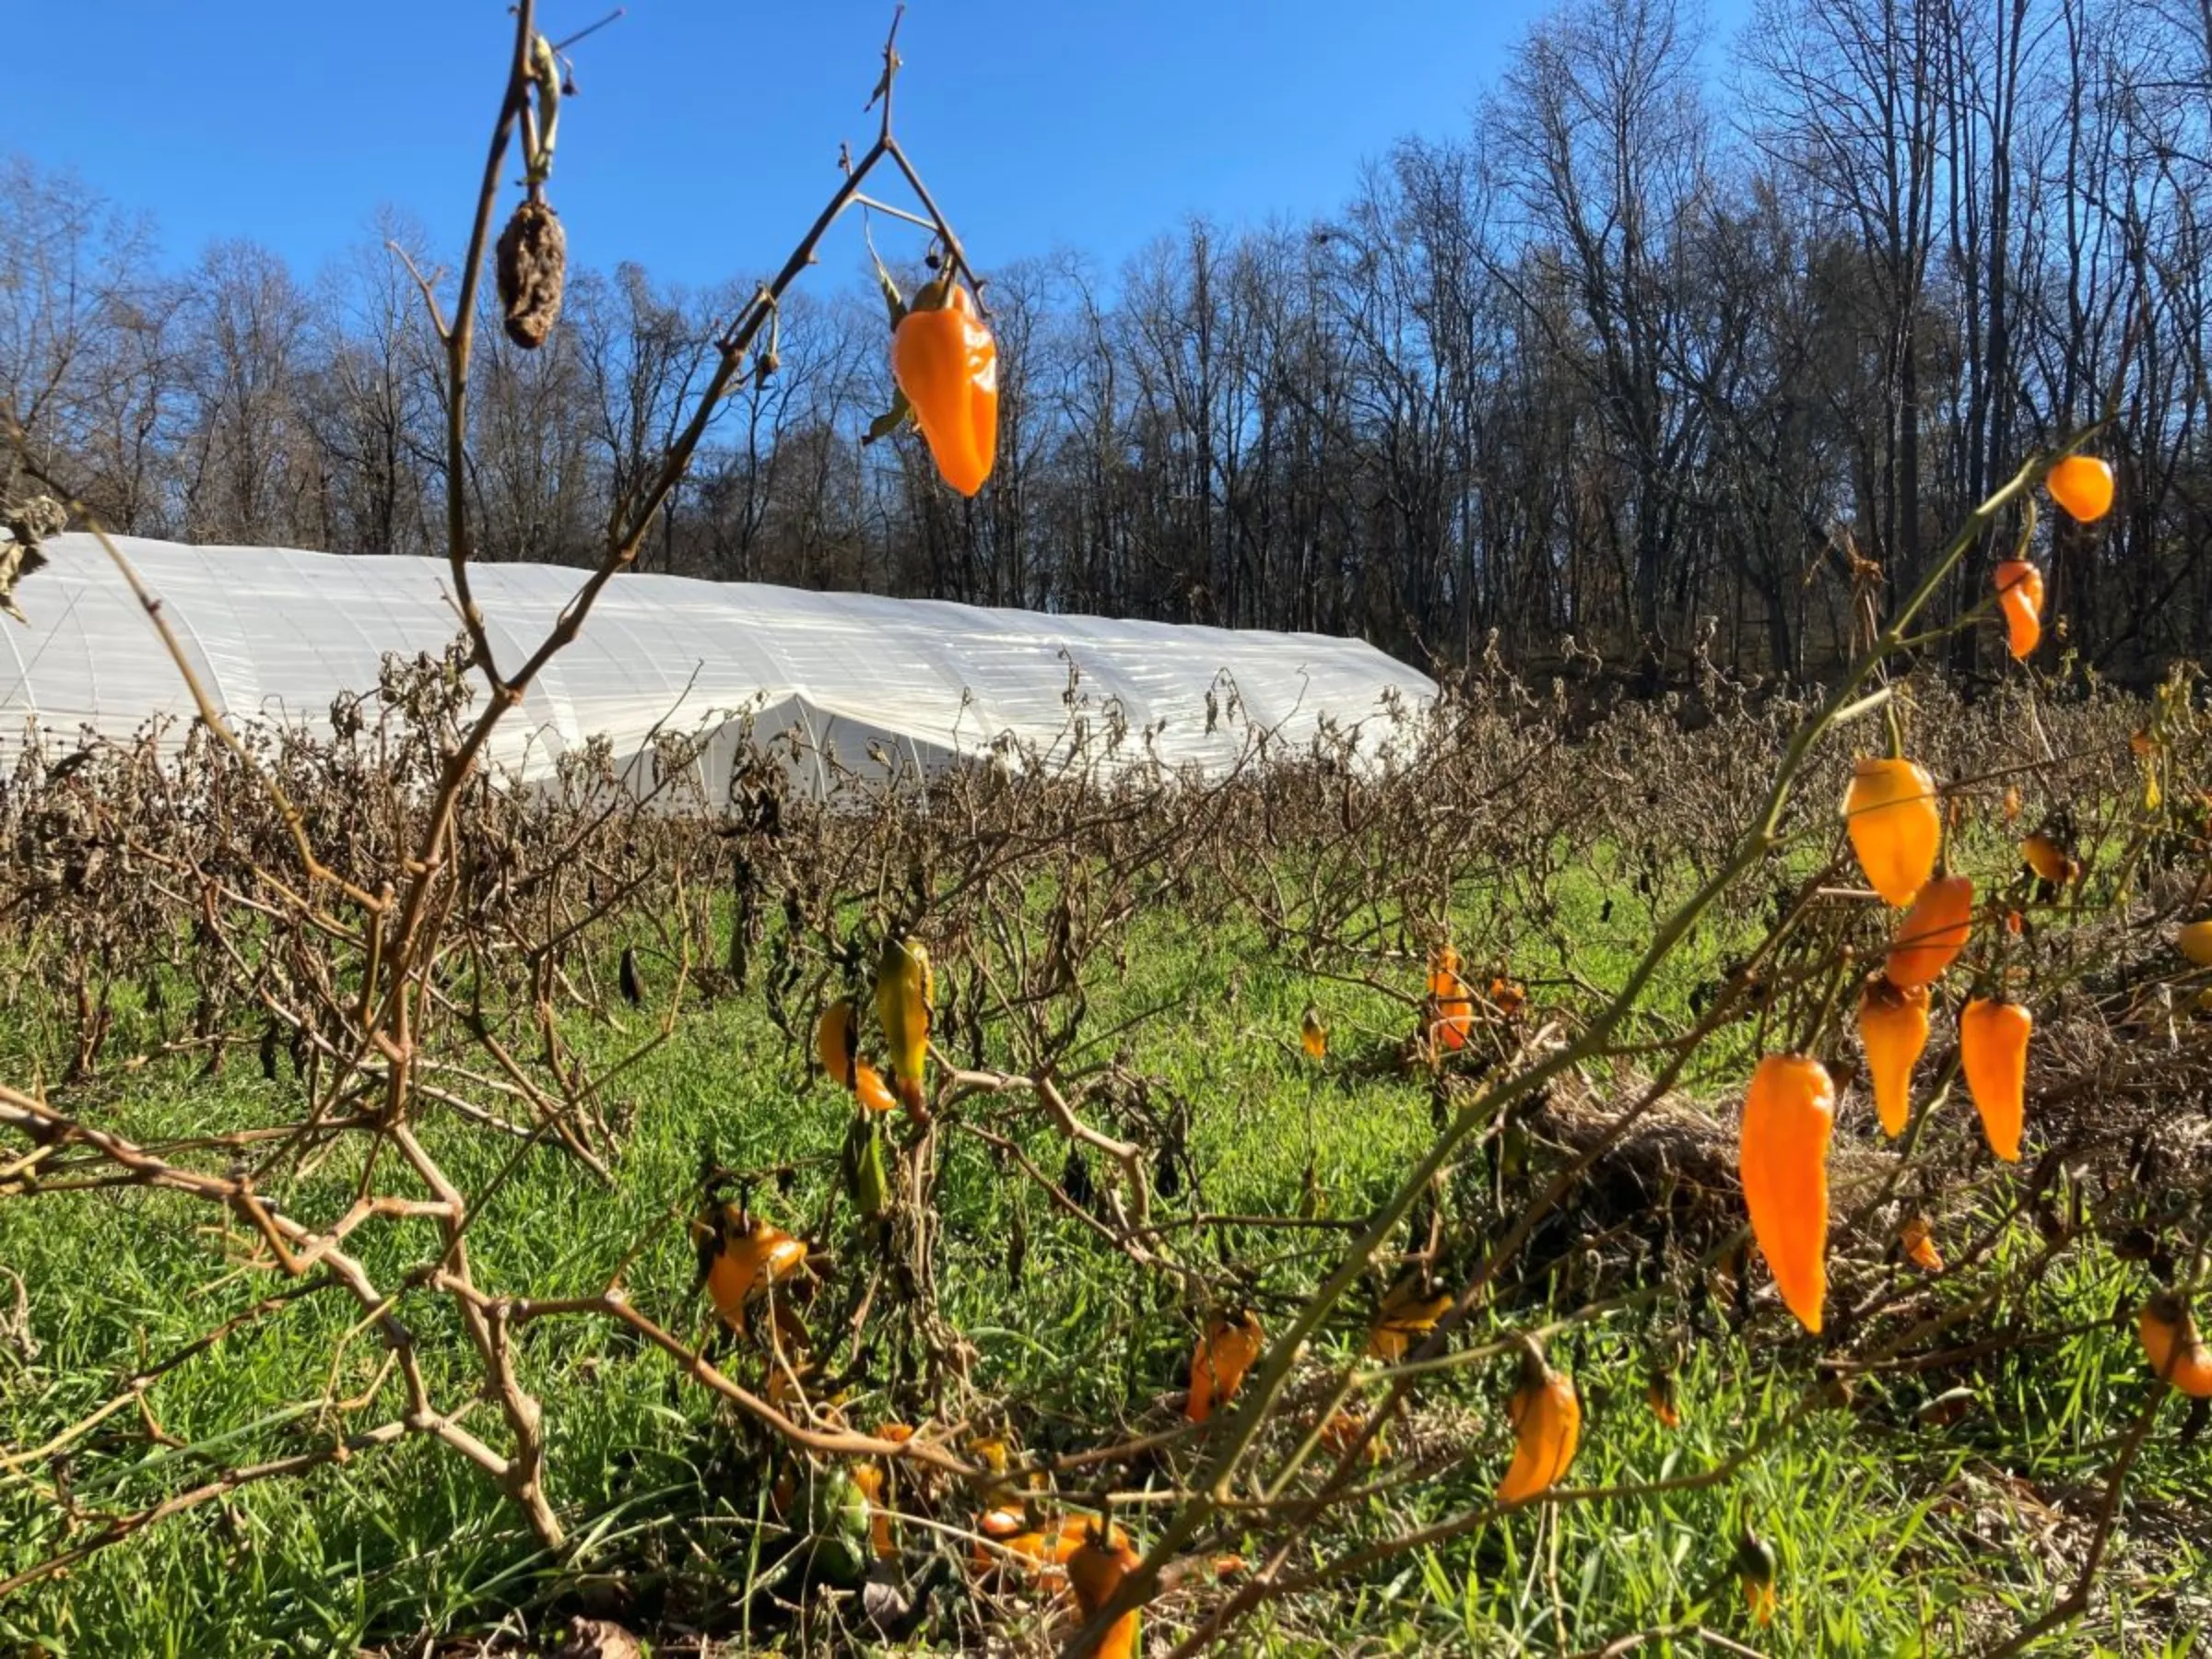 Peppers left over from the previous harvest sit among a winter cover crop on a farm in Upper Marlboro, Maryland, on November 21, 2022